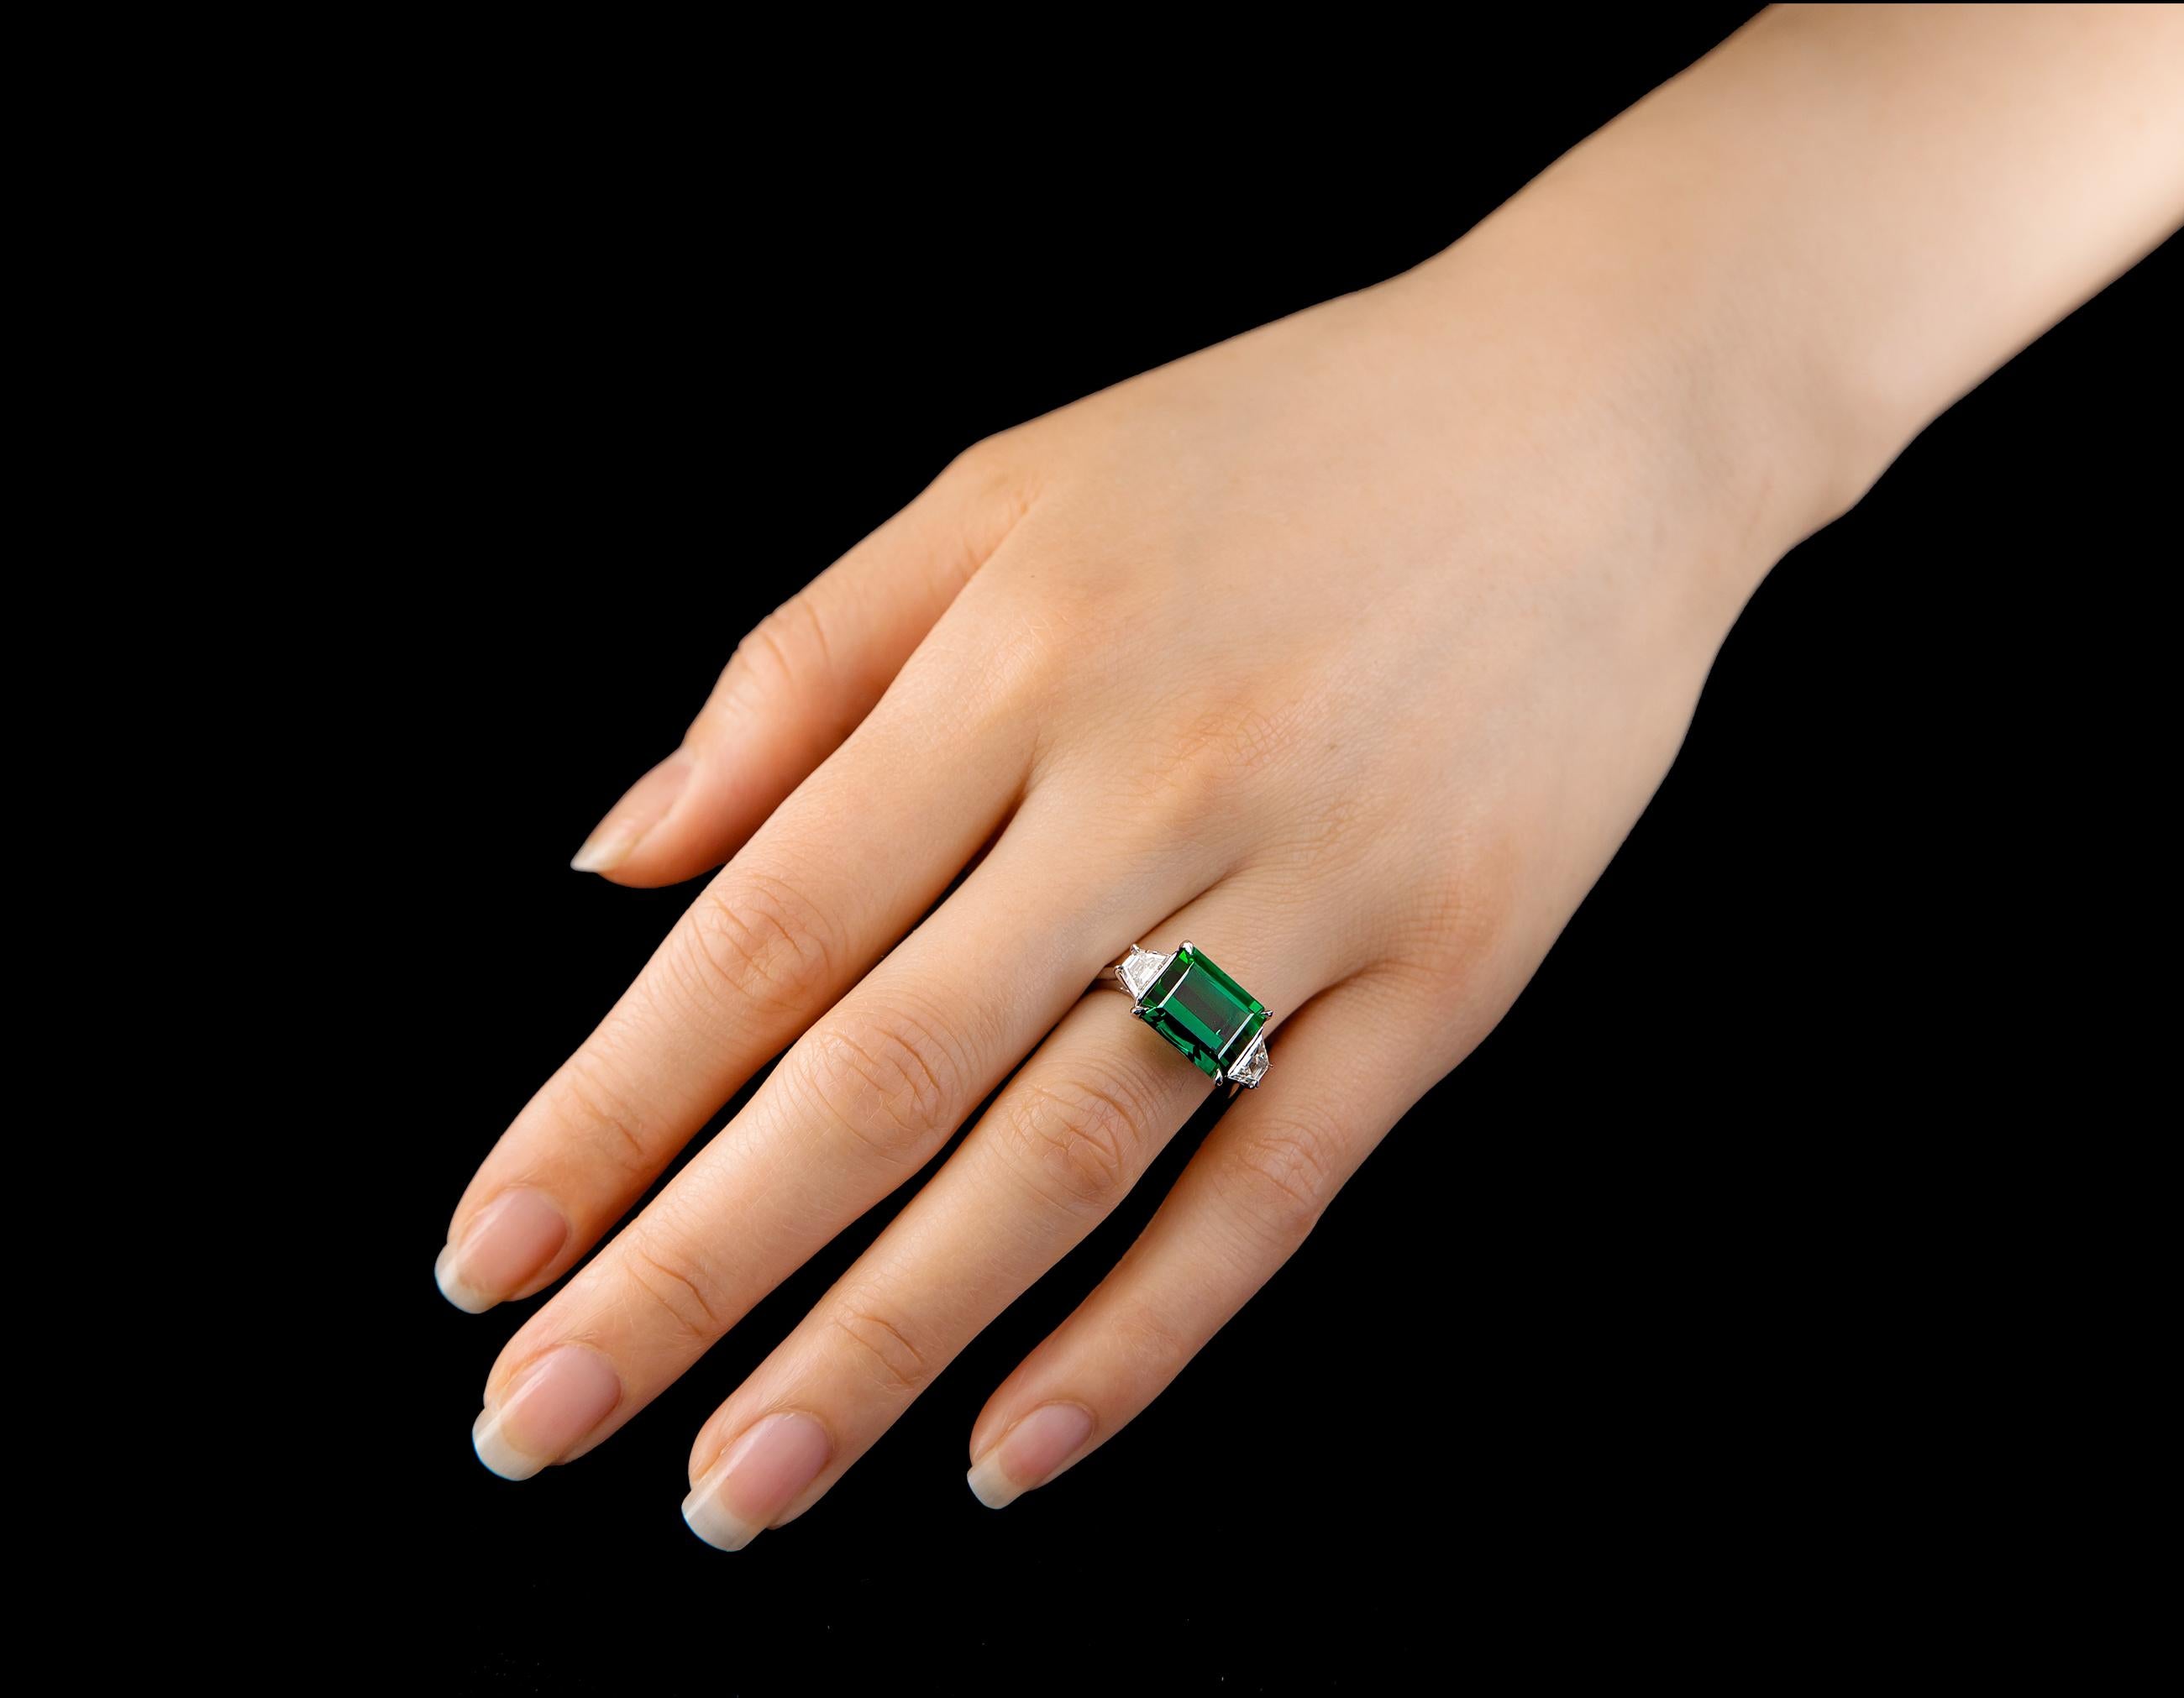 A classic three-stone ring featuring a 5.95 ct emerald cut tourmaline and trapezoid diamonds.

Finger size: US - 5 3/4 
Chrome tourmaline - 5.95 carat
Trapezoid diamonds -  0.79 carats total
Single claw prongs
